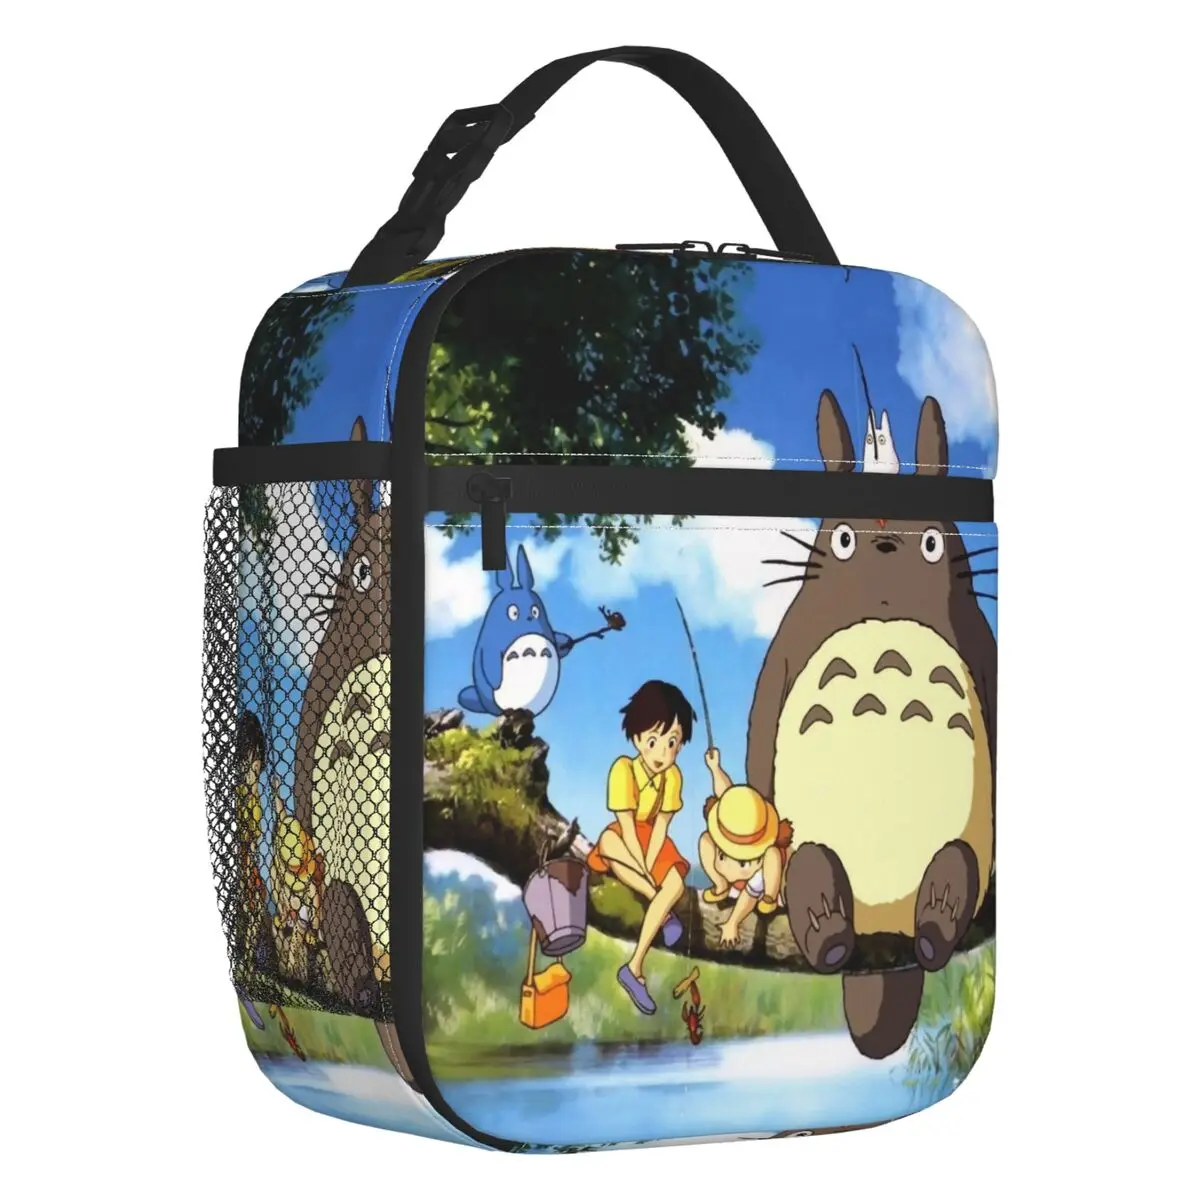 My Neighbor Totoro Studio Ghibli Anime Insulated Lunch Bags for Outdoor Picnic Miyazaki Hayao Portable Cooler Thermal Lunch Box